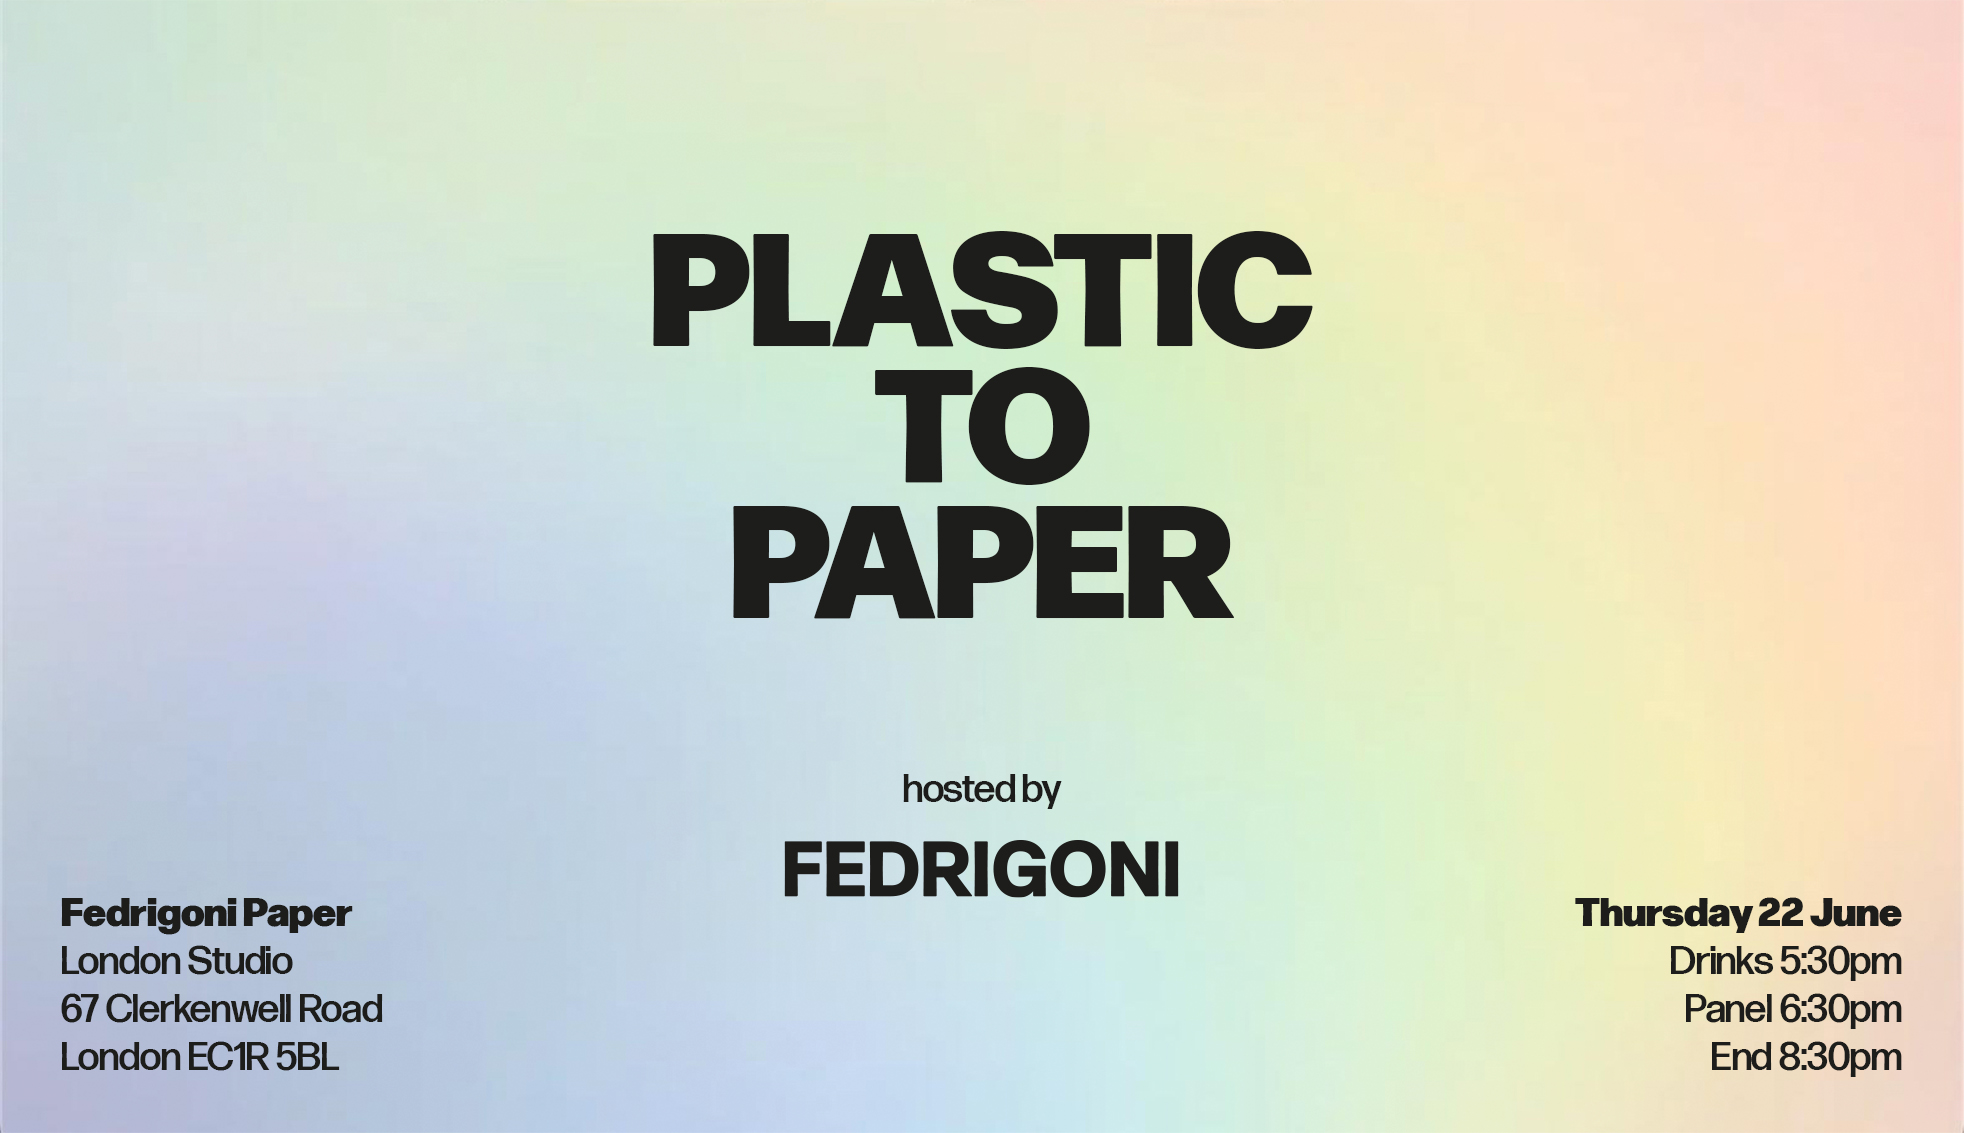 Plastic to Paper Event in London